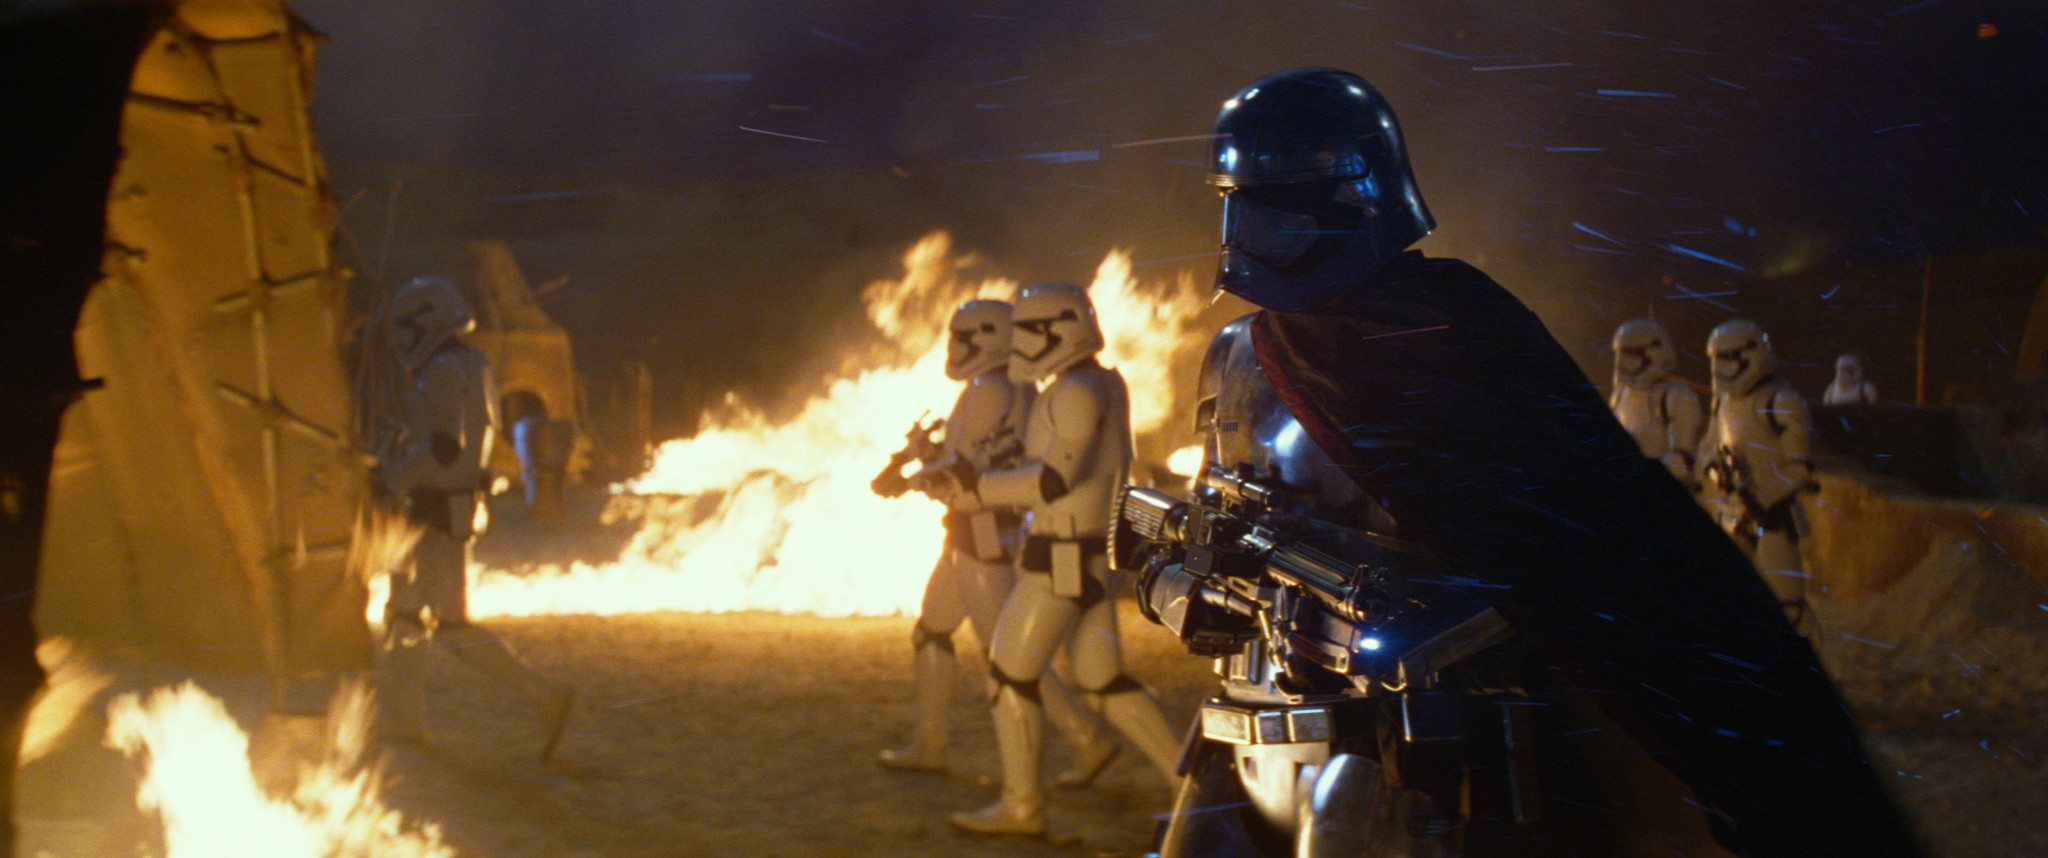 download the last version for apple Star Wars Ep. VII: The Force Awakens